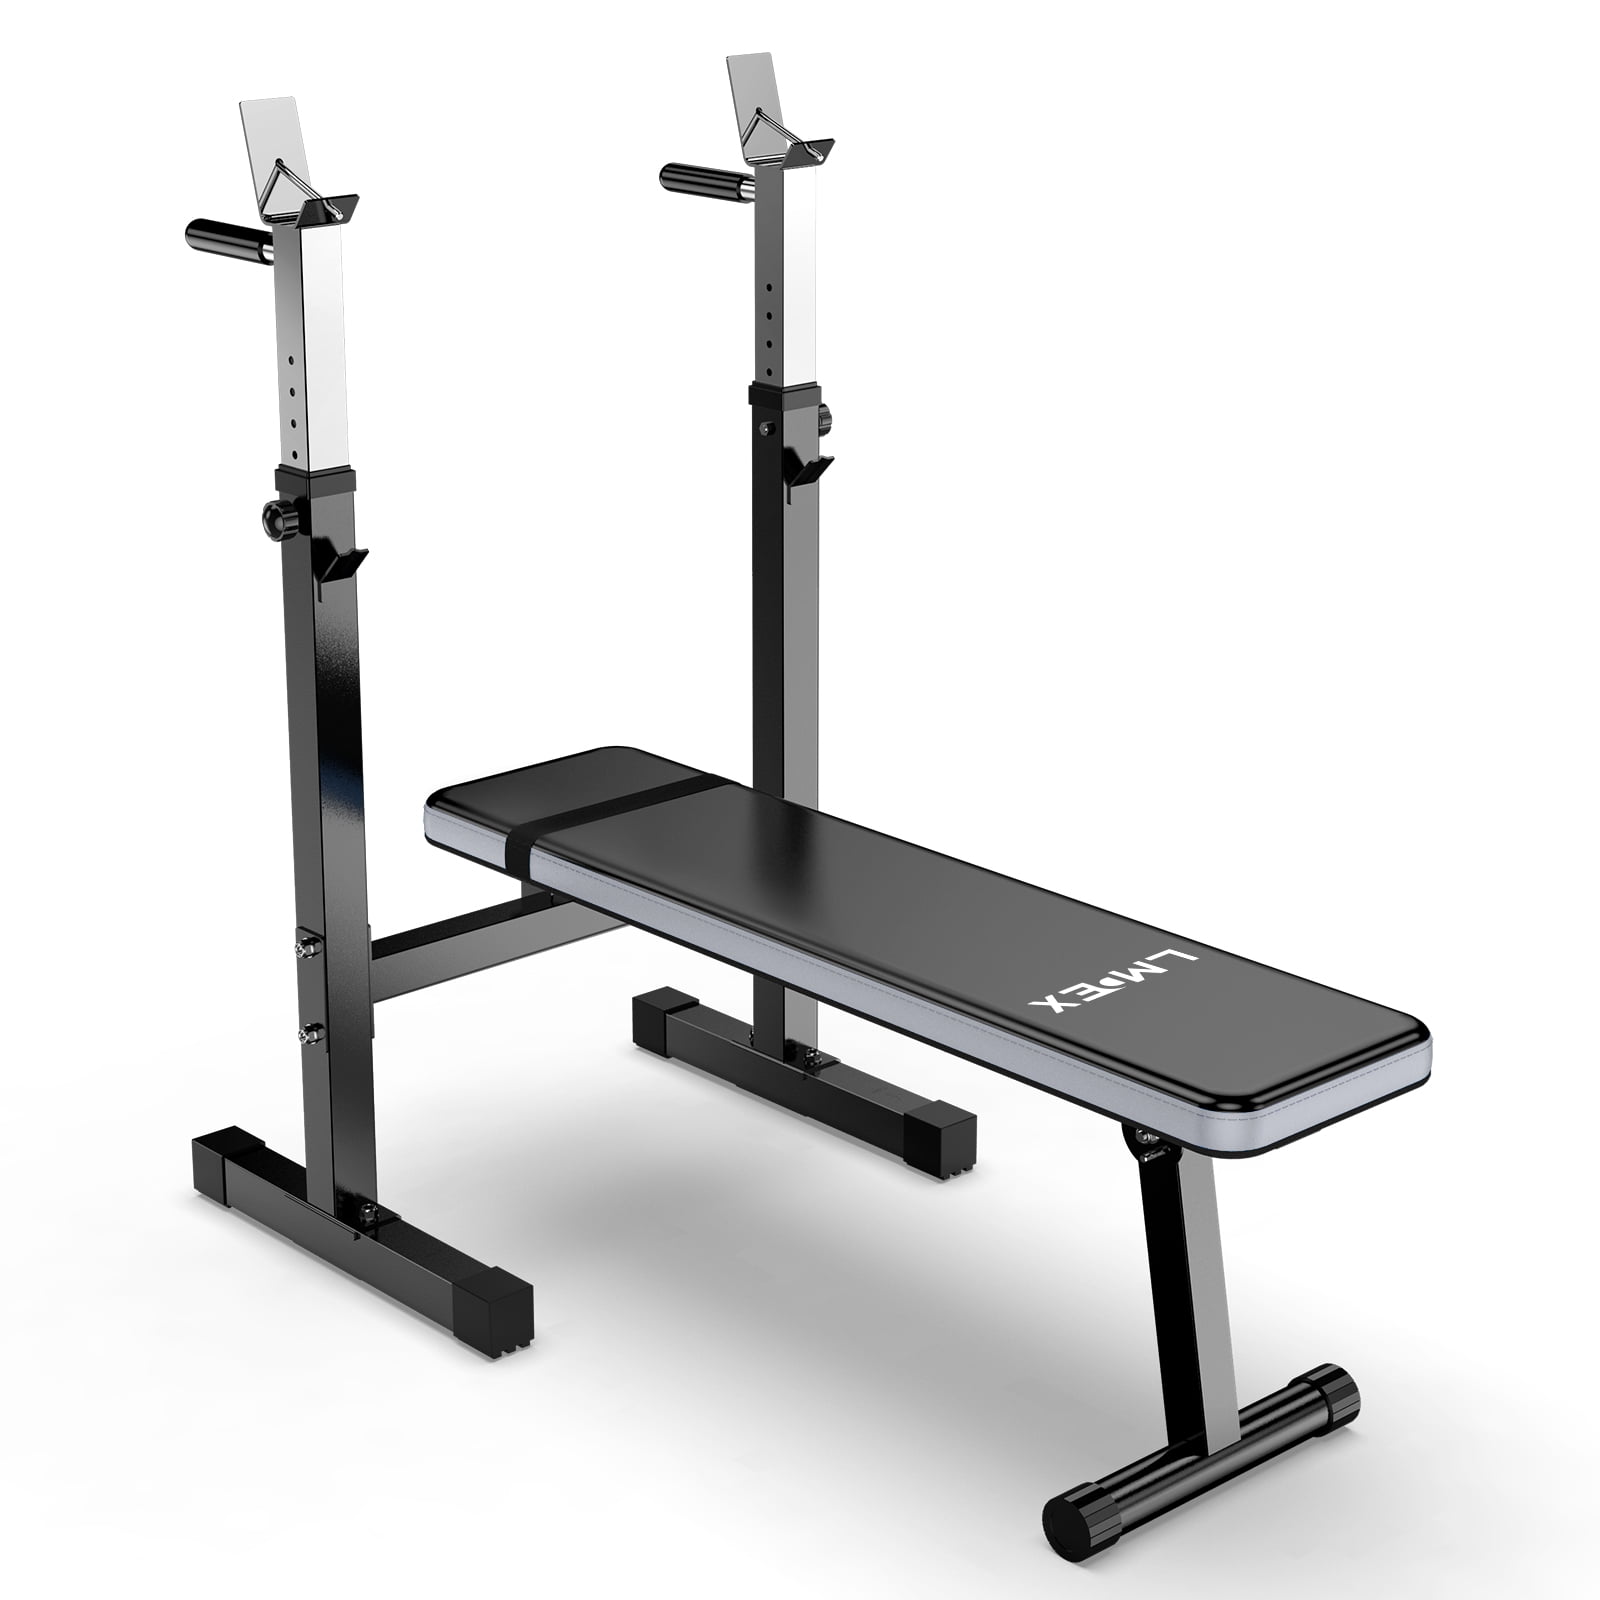 LMDEX Adjustable Weight Fitness Decline Bench Gym Full Strength Incline for Home Folding Barbell & Body Workout Rack Capability